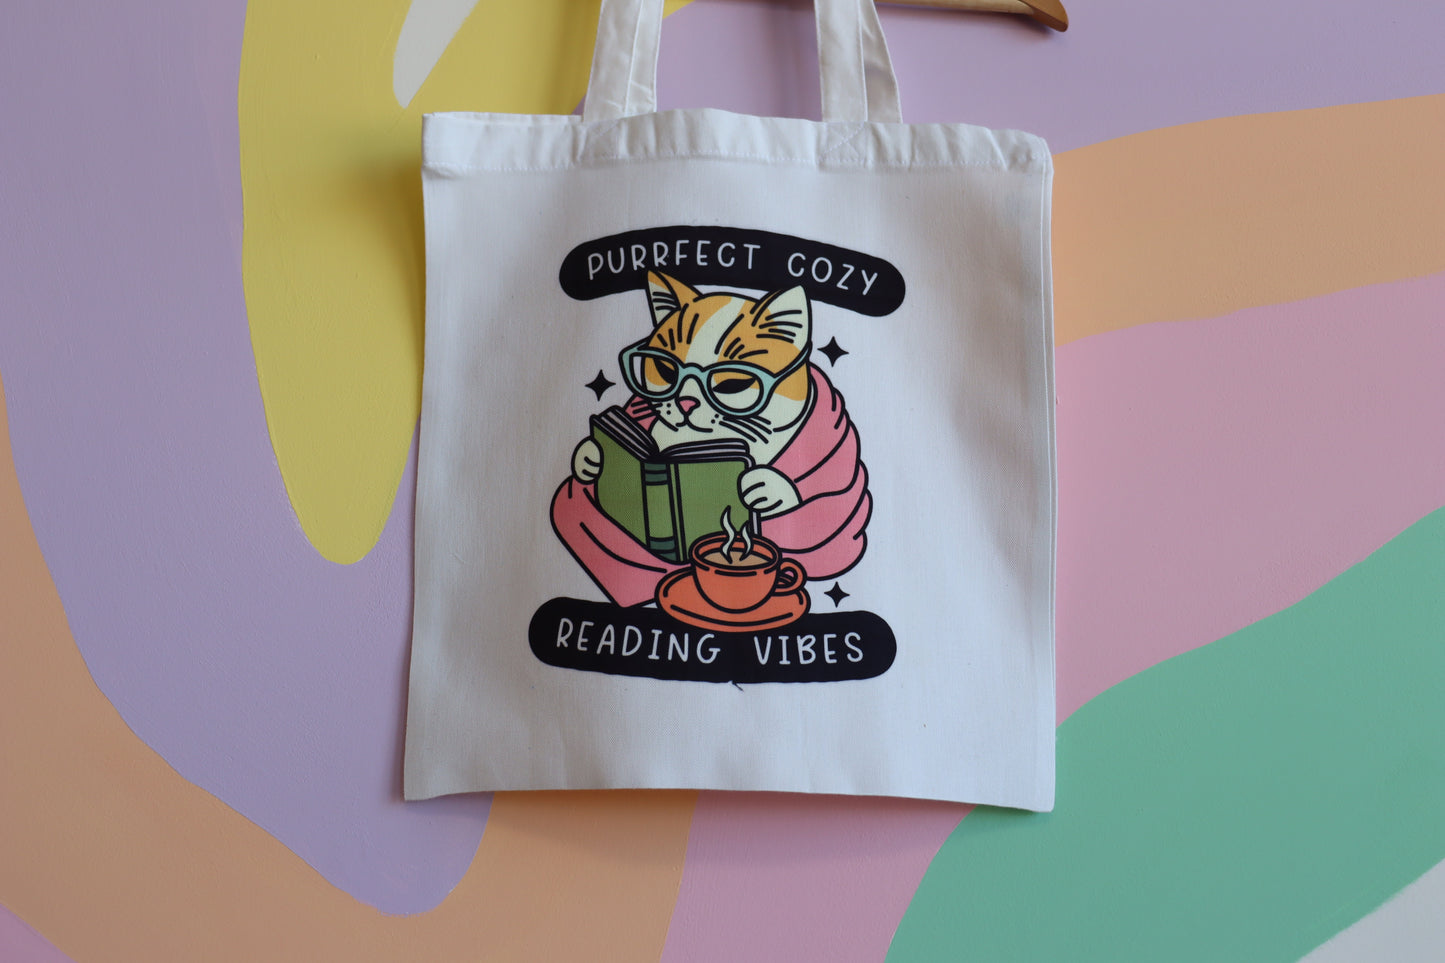 Purrfect Cozy Reading Vibes Tote Bag